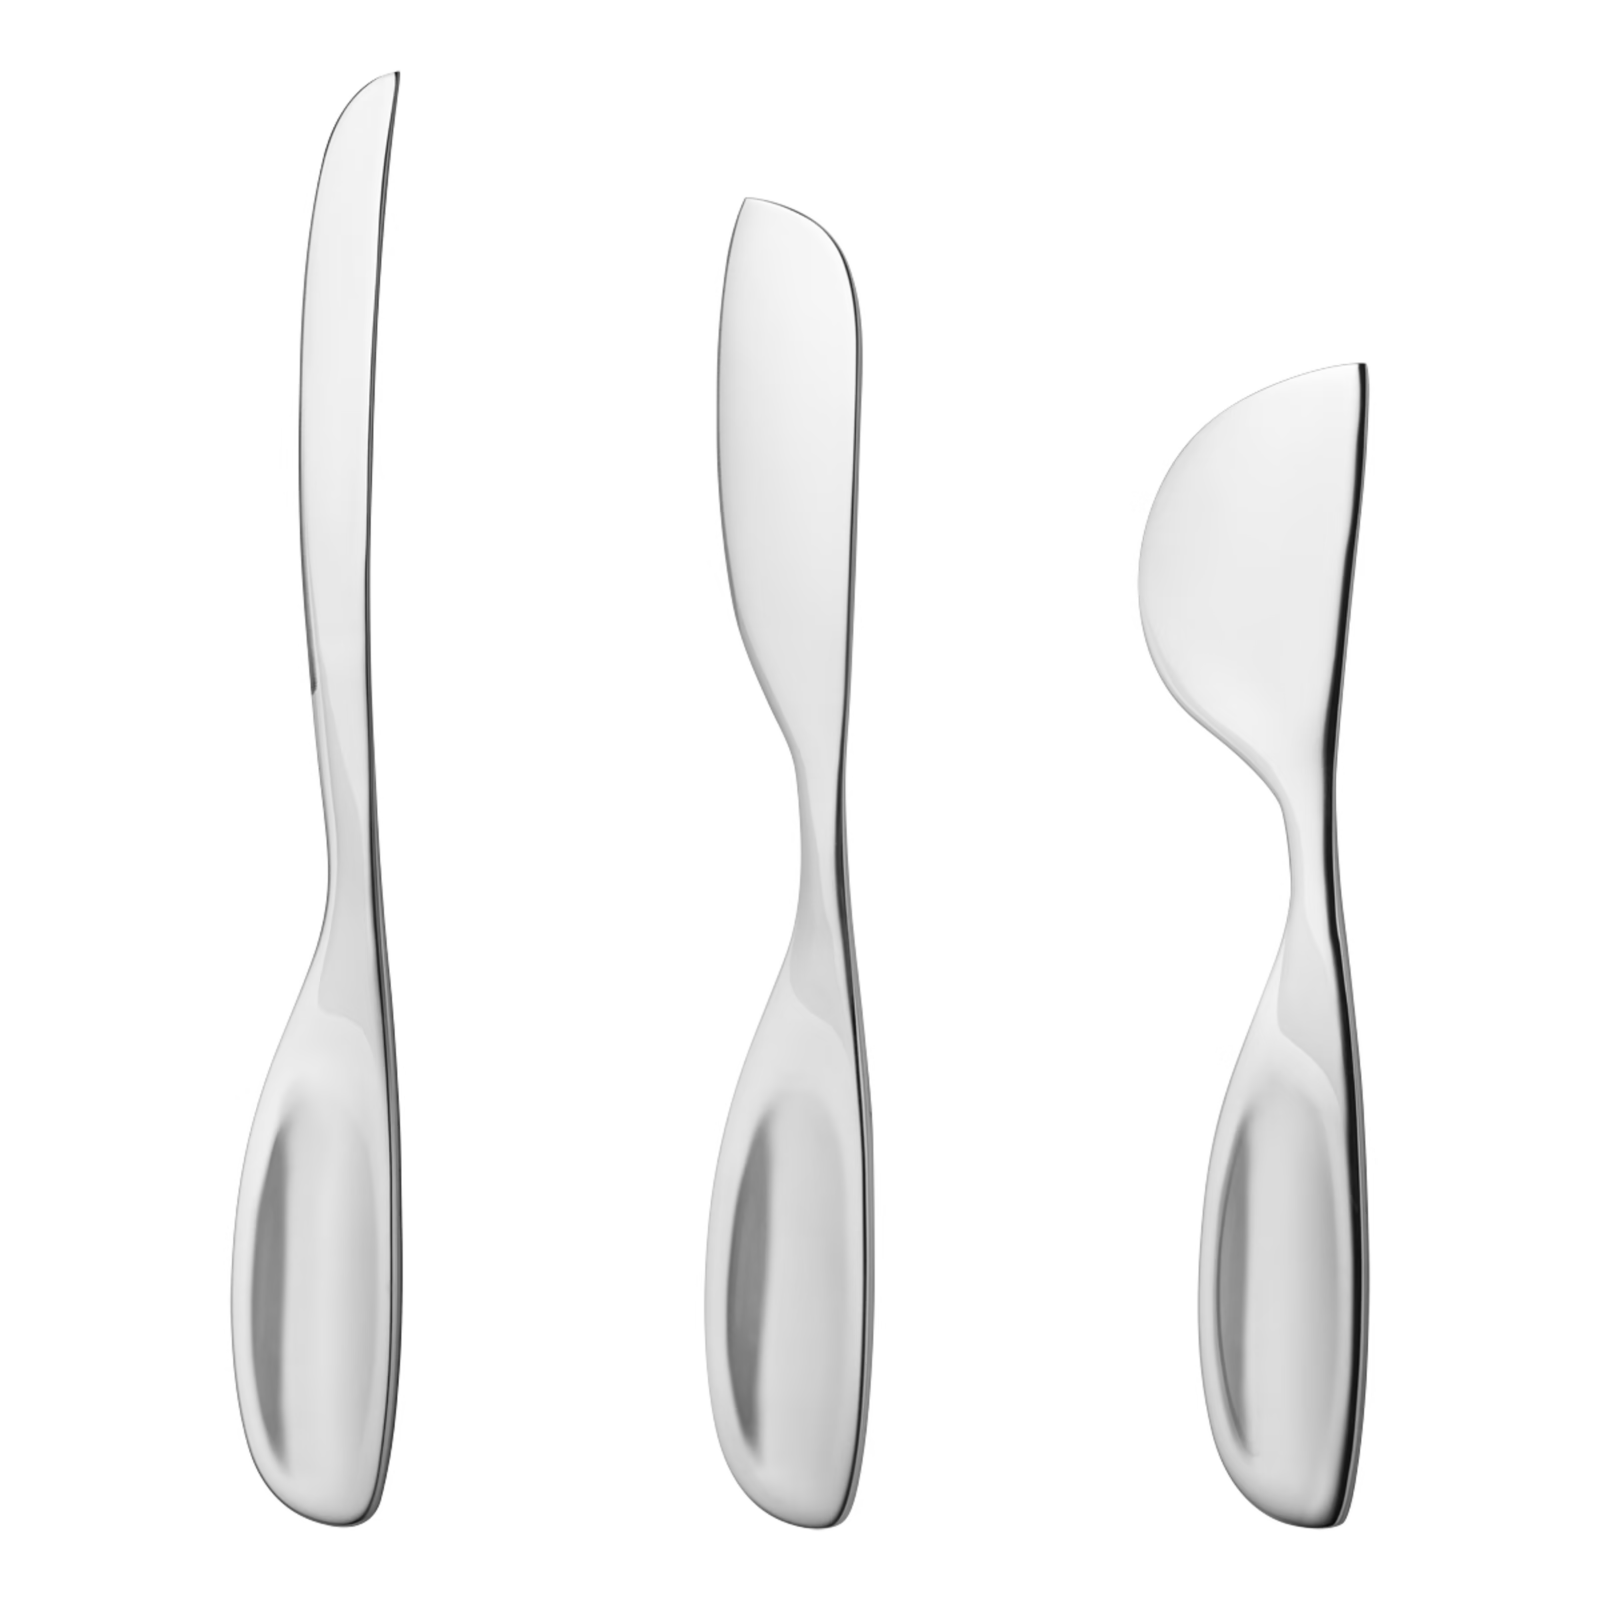 Alfredo by Georg Jensen Stainless Steel Cheese Knife Set 3 Piece - New - $147.51